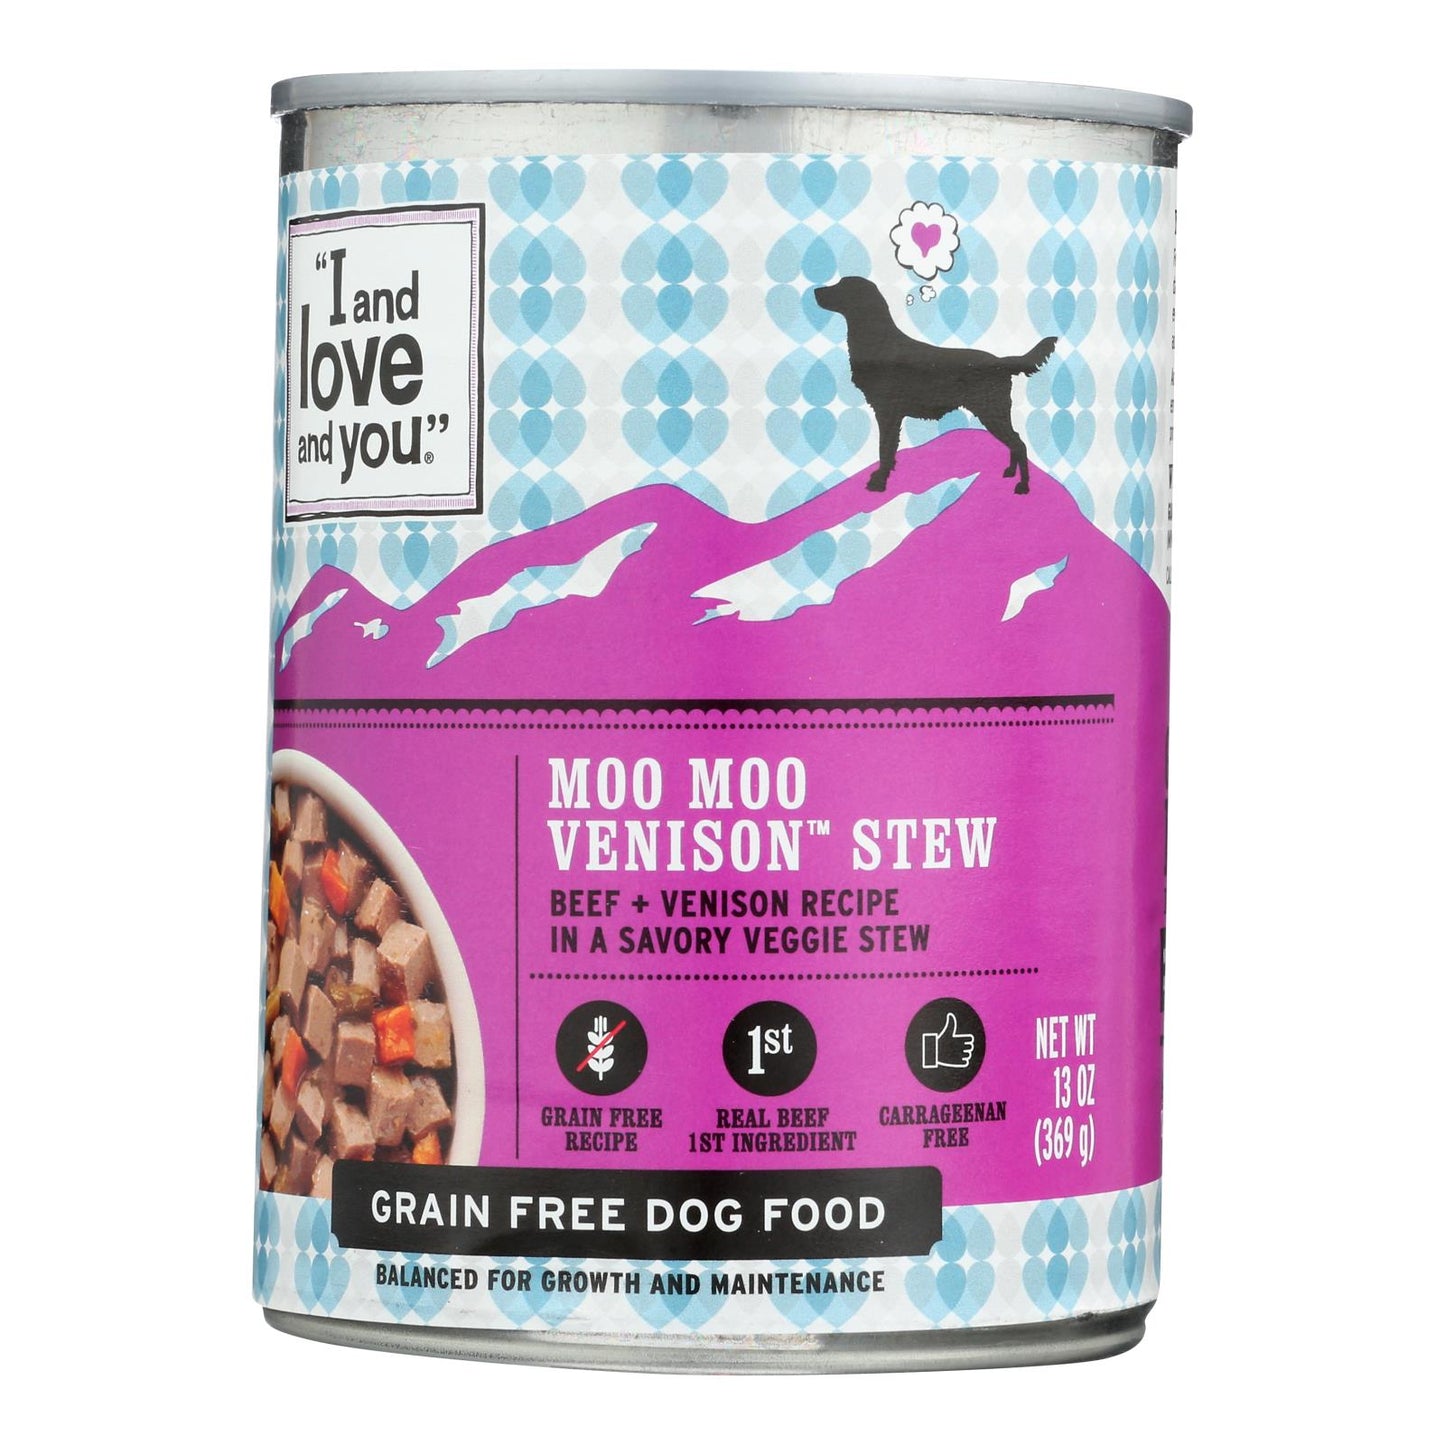 I And Love And You Dog Canned Food Moo Moo Venison Stew  - Case Of 12 - 13 Oz